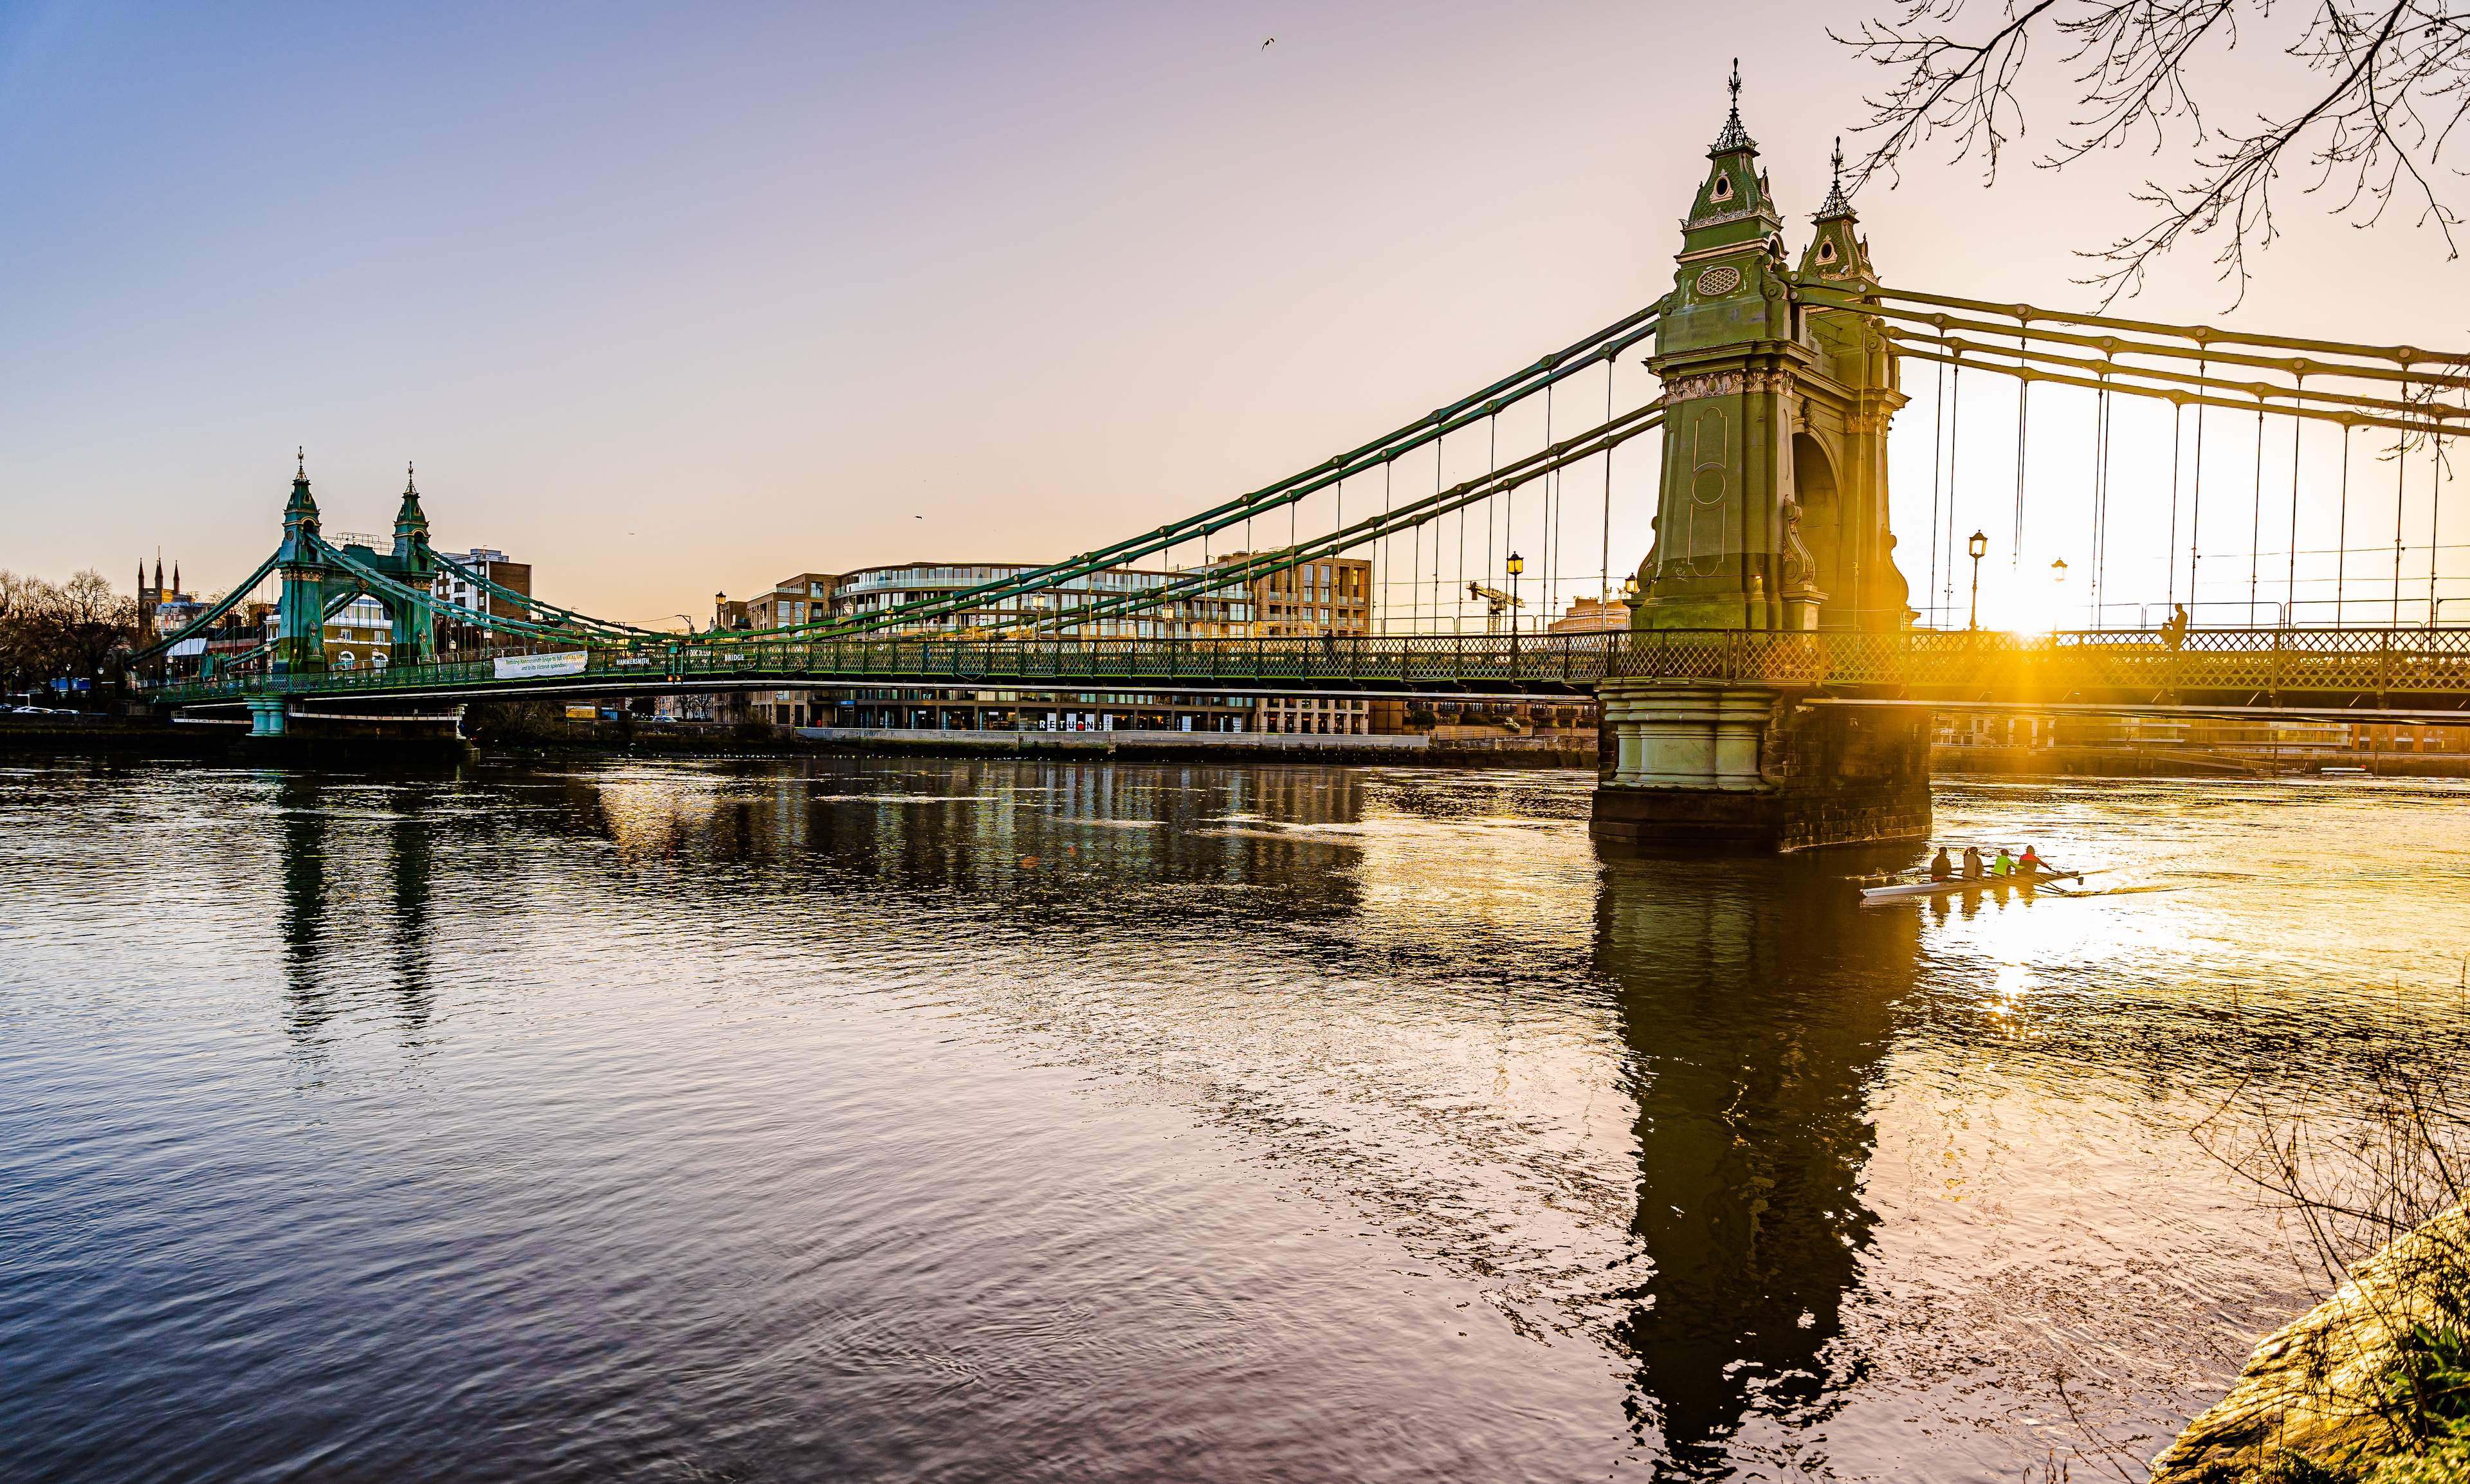 A view from the south riverbank of Thames on Hammersmith Bridge during the golden hour, London, UK